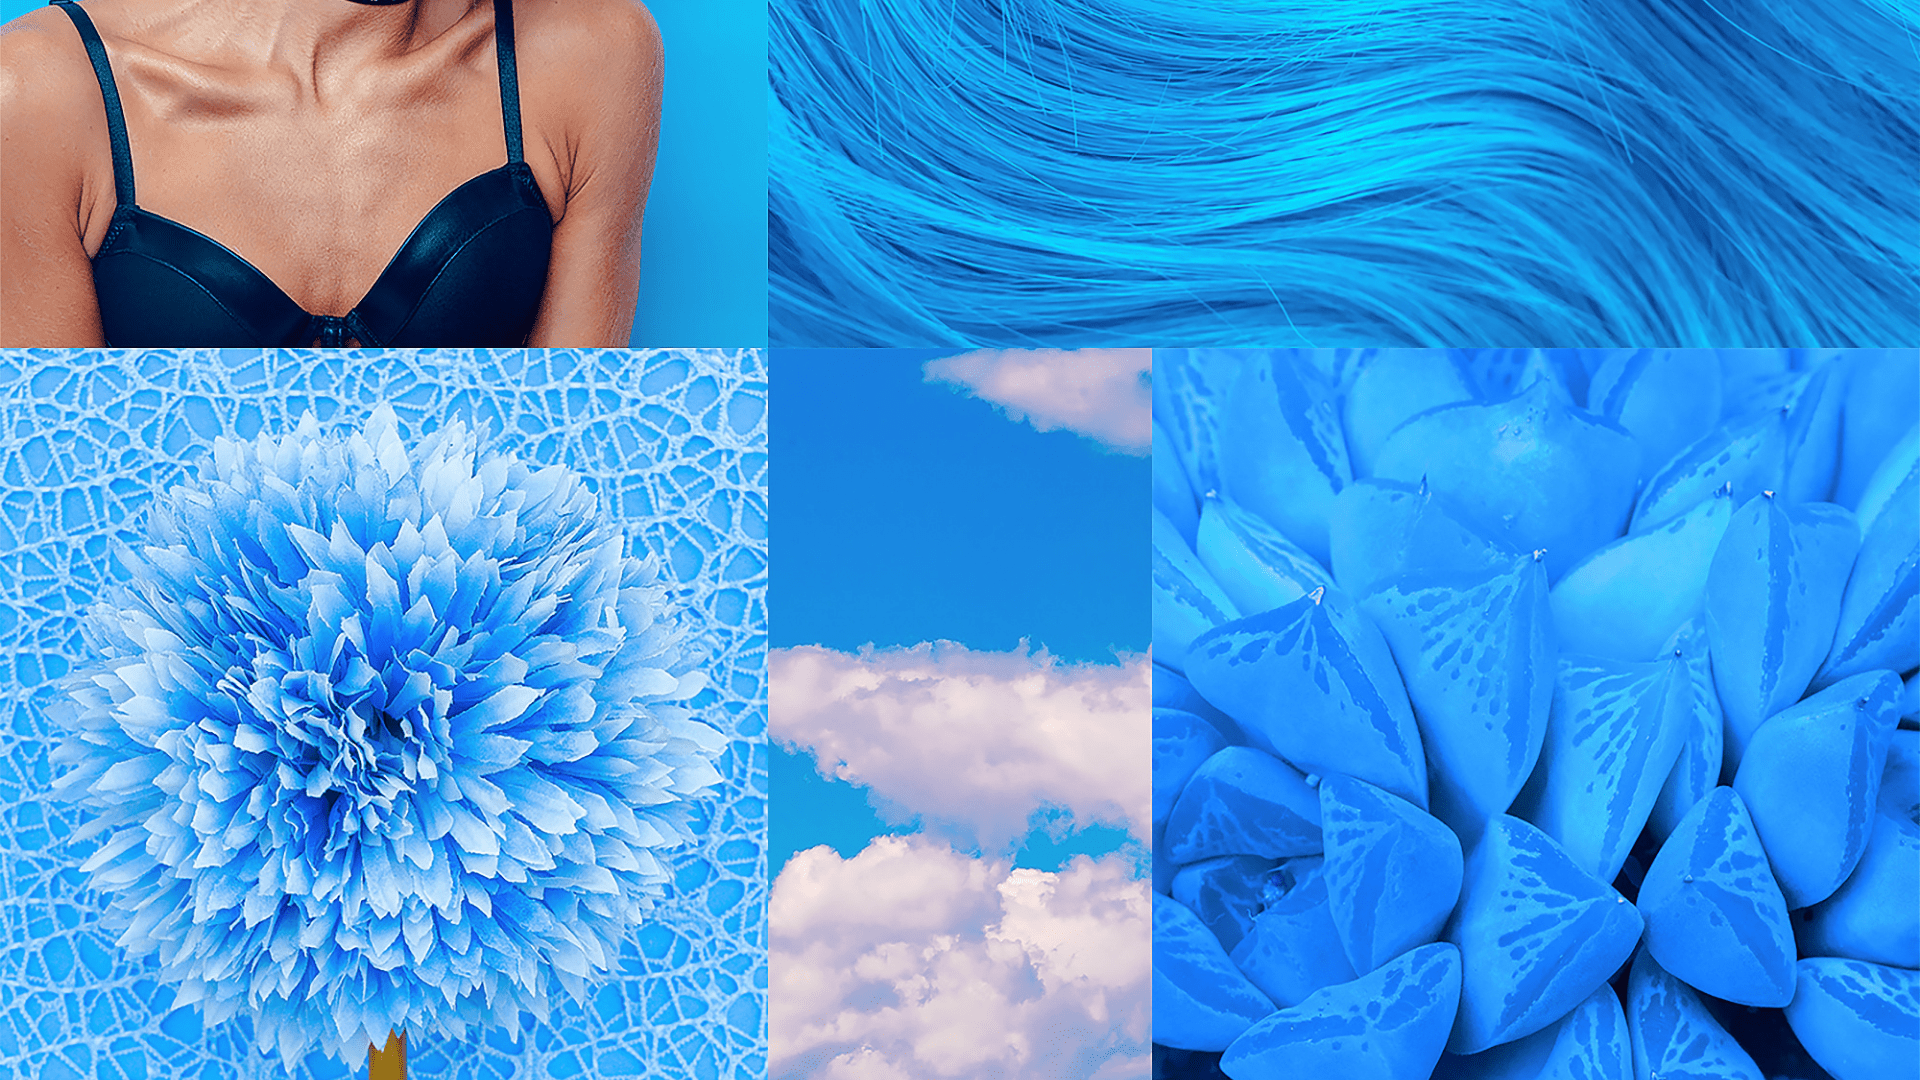 A collage of blue images including a woman's torso, hair, and flowers. - Computer, blue, desktop